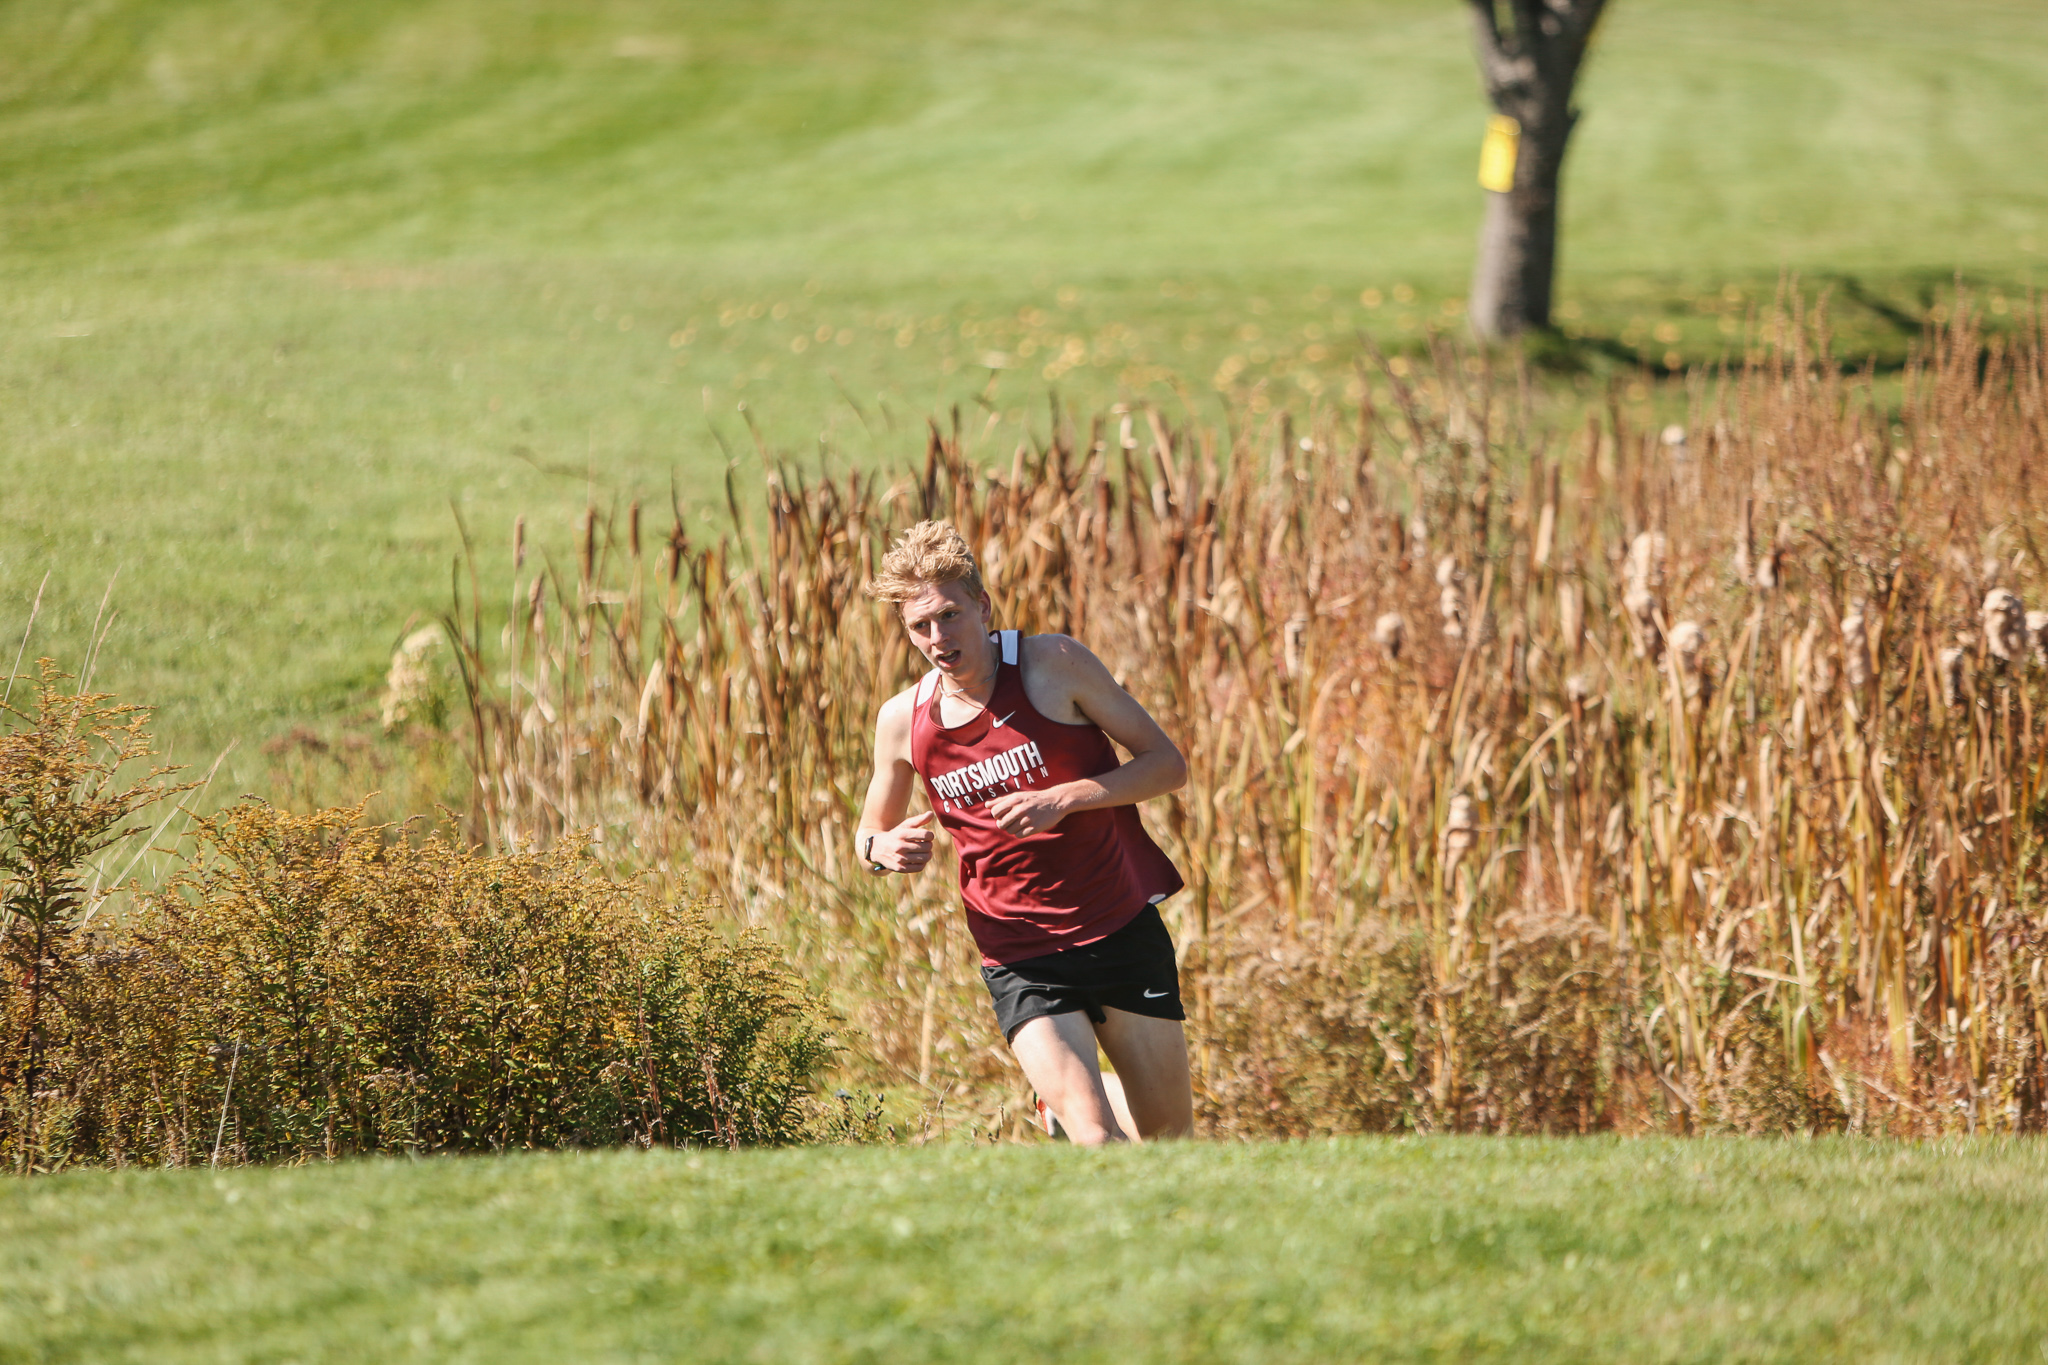 A man in a maroon shirt is running in a grassy field.